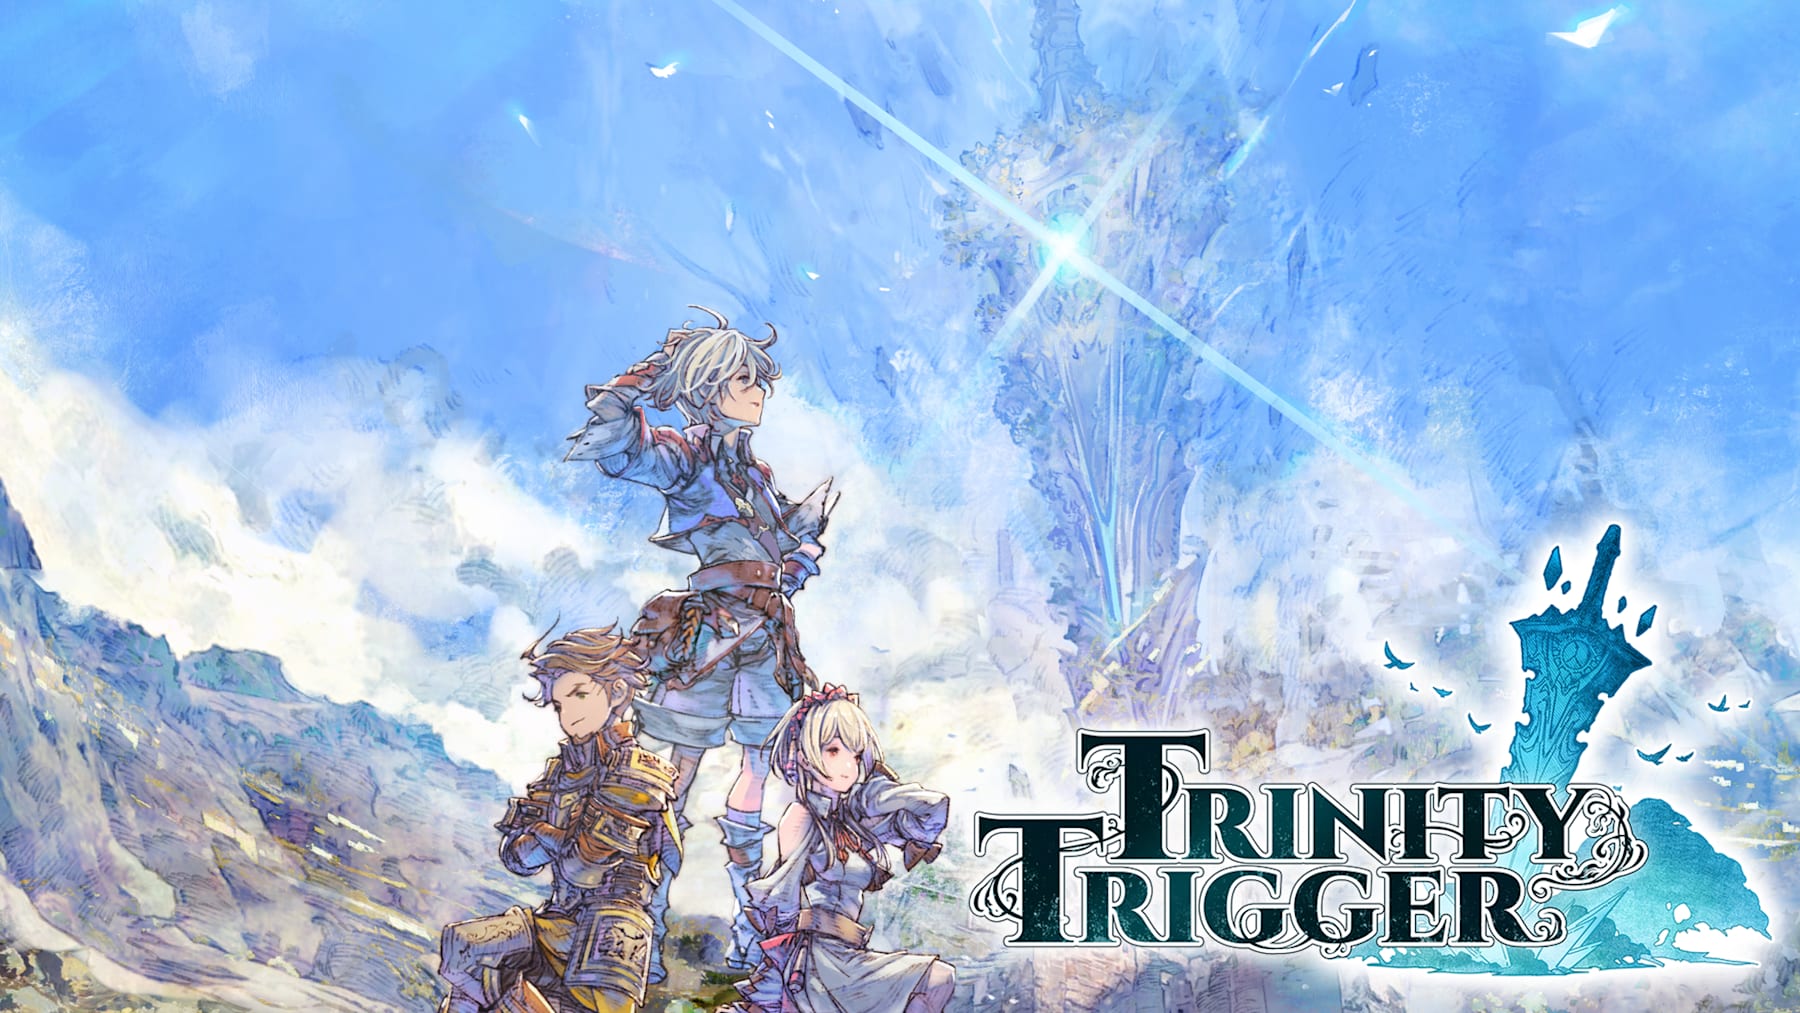 Trinity Trigger: Standard Edition $20 or Deluxe Edition $22.50 (PC Digital Download)